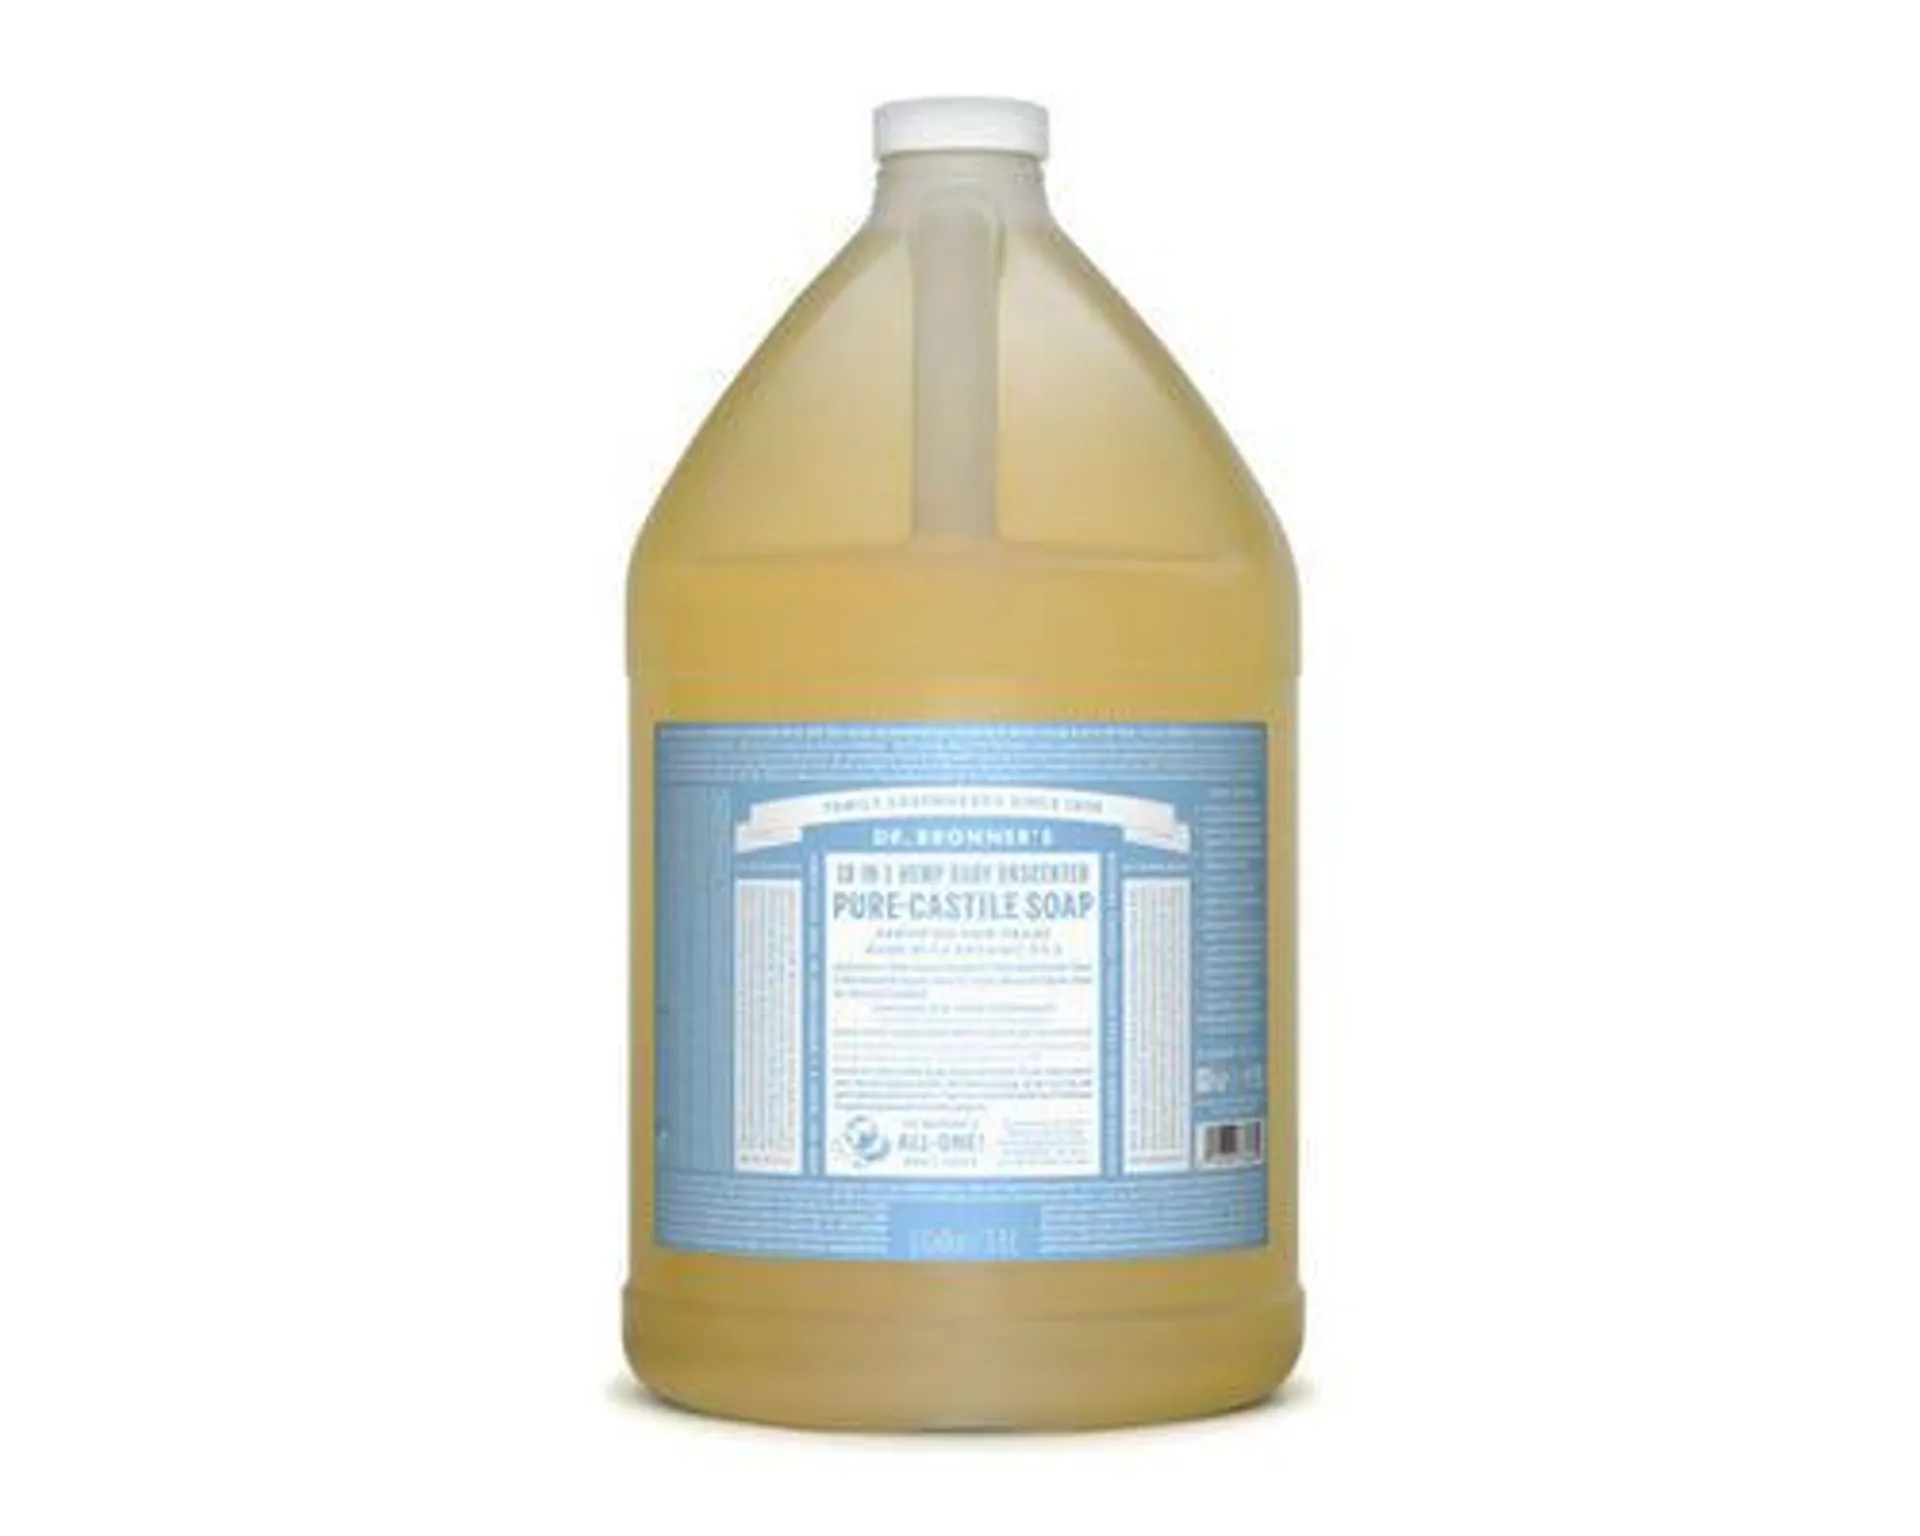 Dr. Bronner's 18-In-1 Pure-Castile Soap Baby Unscented 3.8L